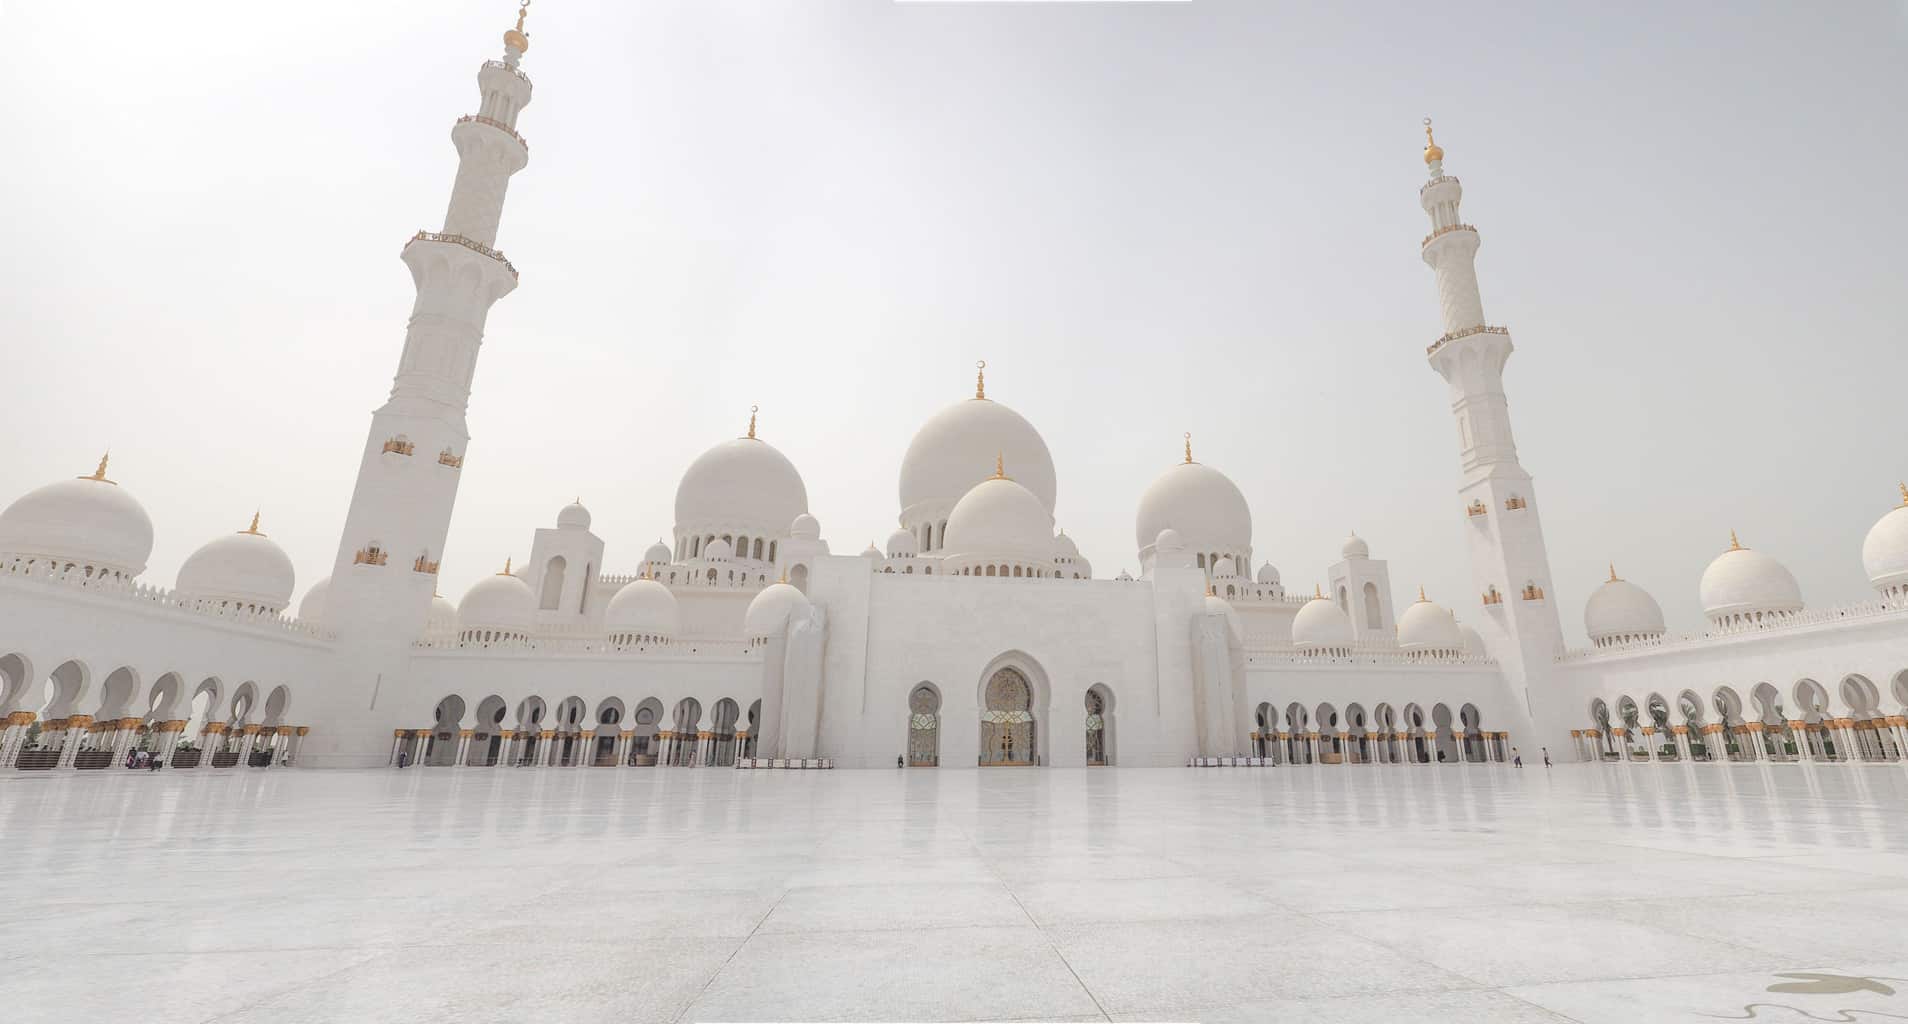 Sheikh Zayed Mosque, the largest mosque in the UAE. a must visit